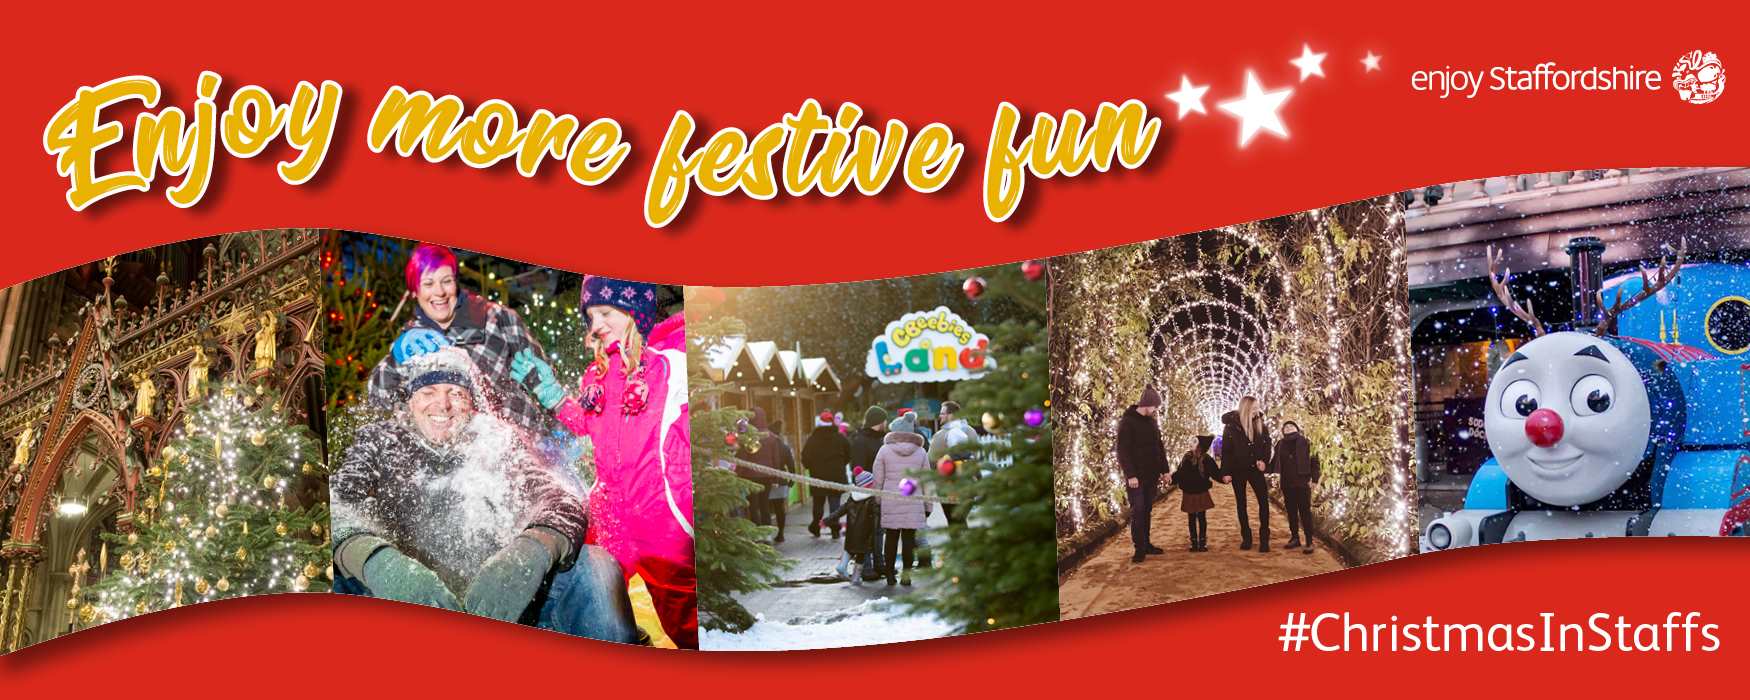 Enjoy more festive fun this Christmas in Staffordshire. Graphic with montage of Christmas event images.